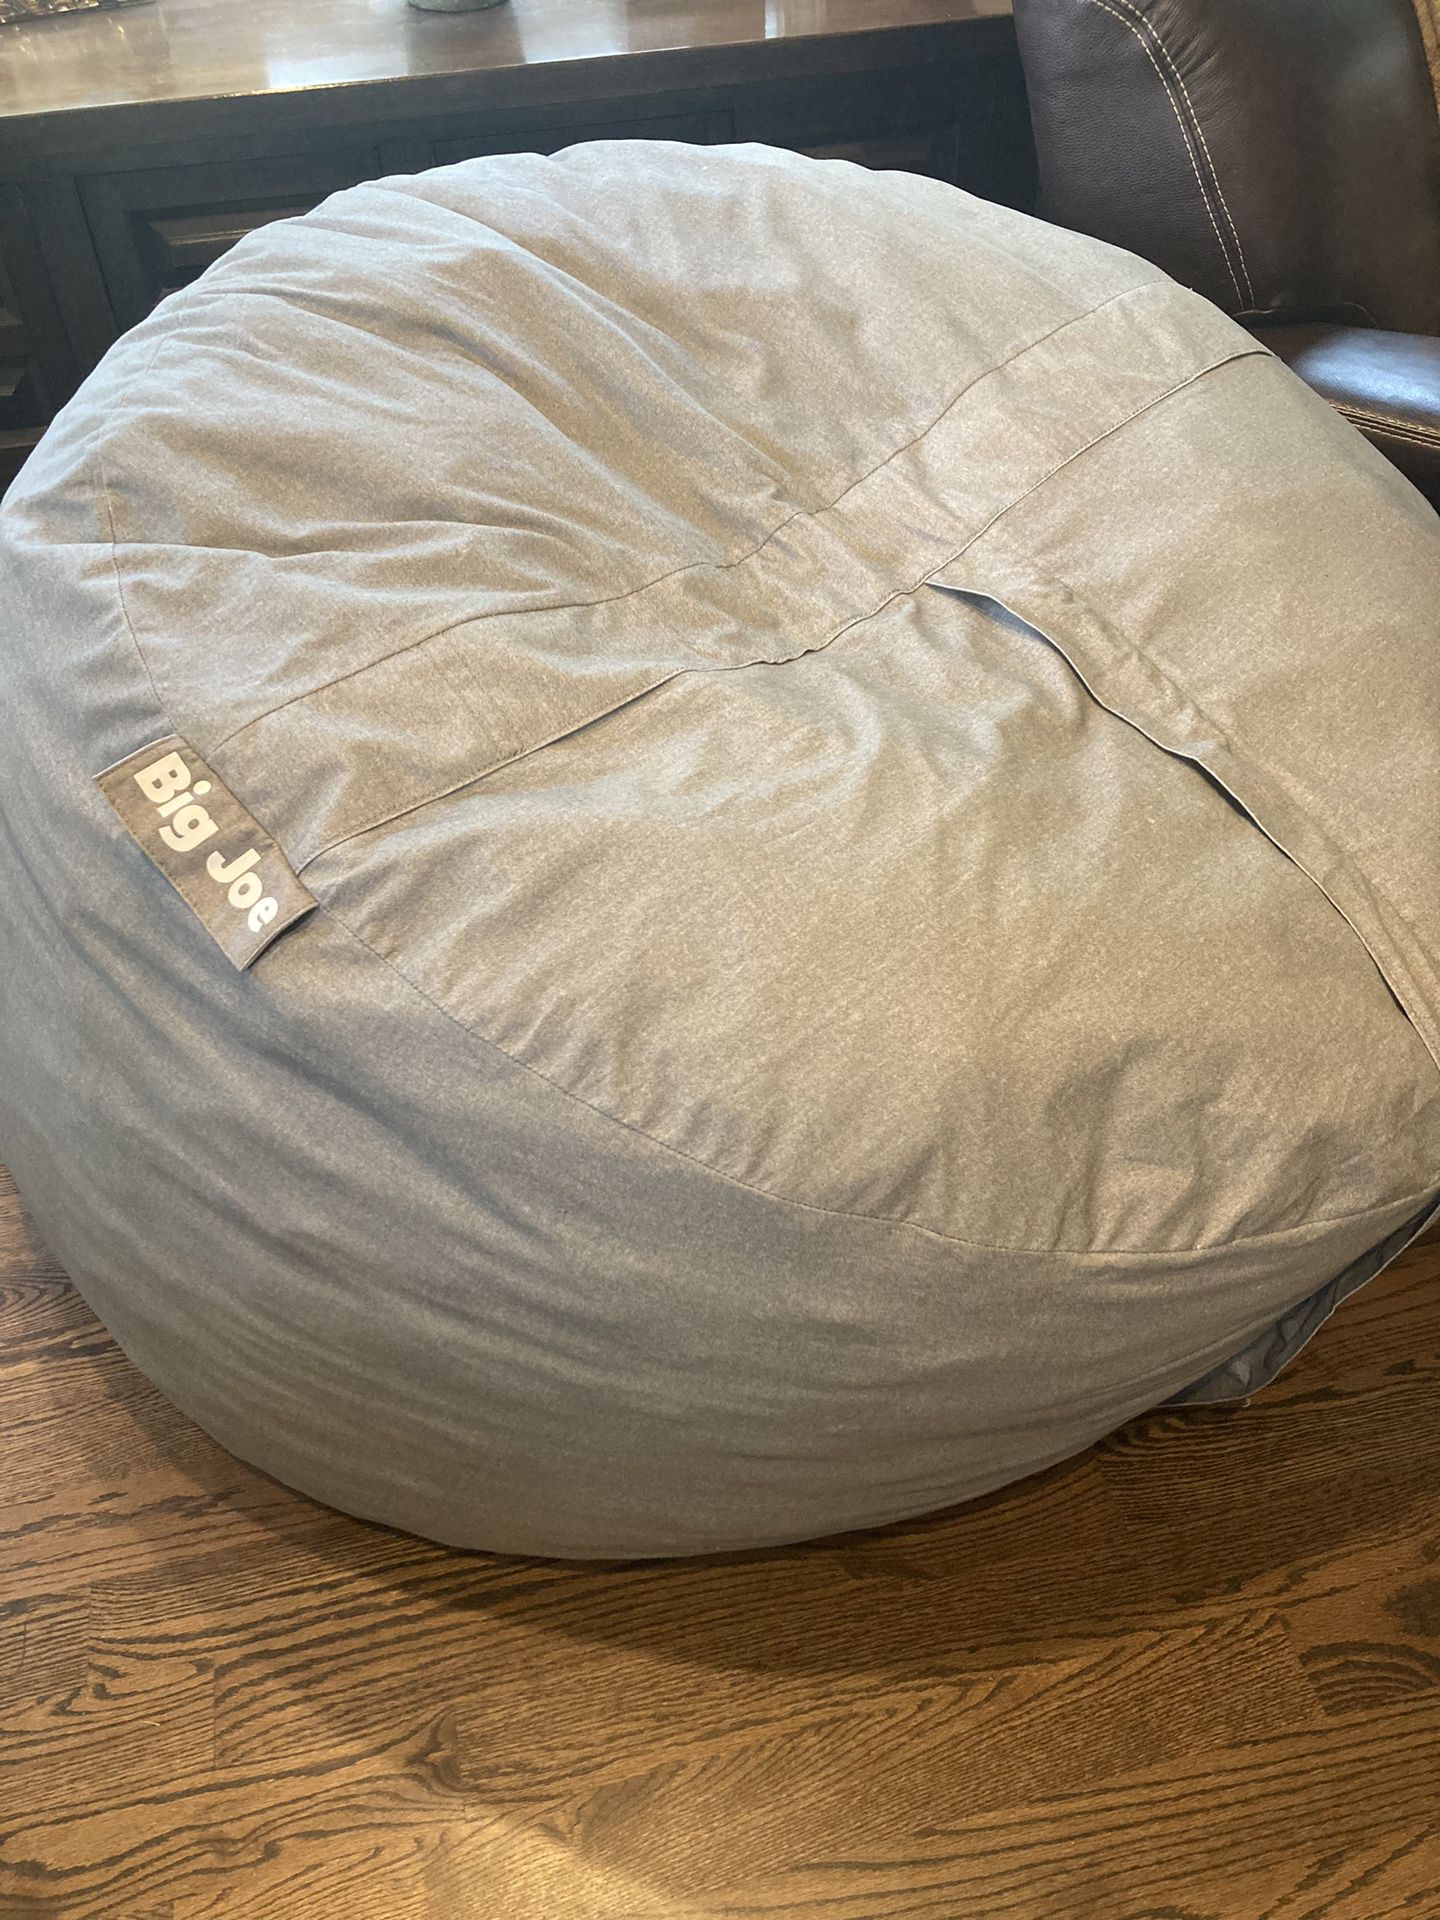 BIG JOE Bean Bag Chair Like NEW Most Comfortable And Cozy Seating Ever! Fuf XL Foam 